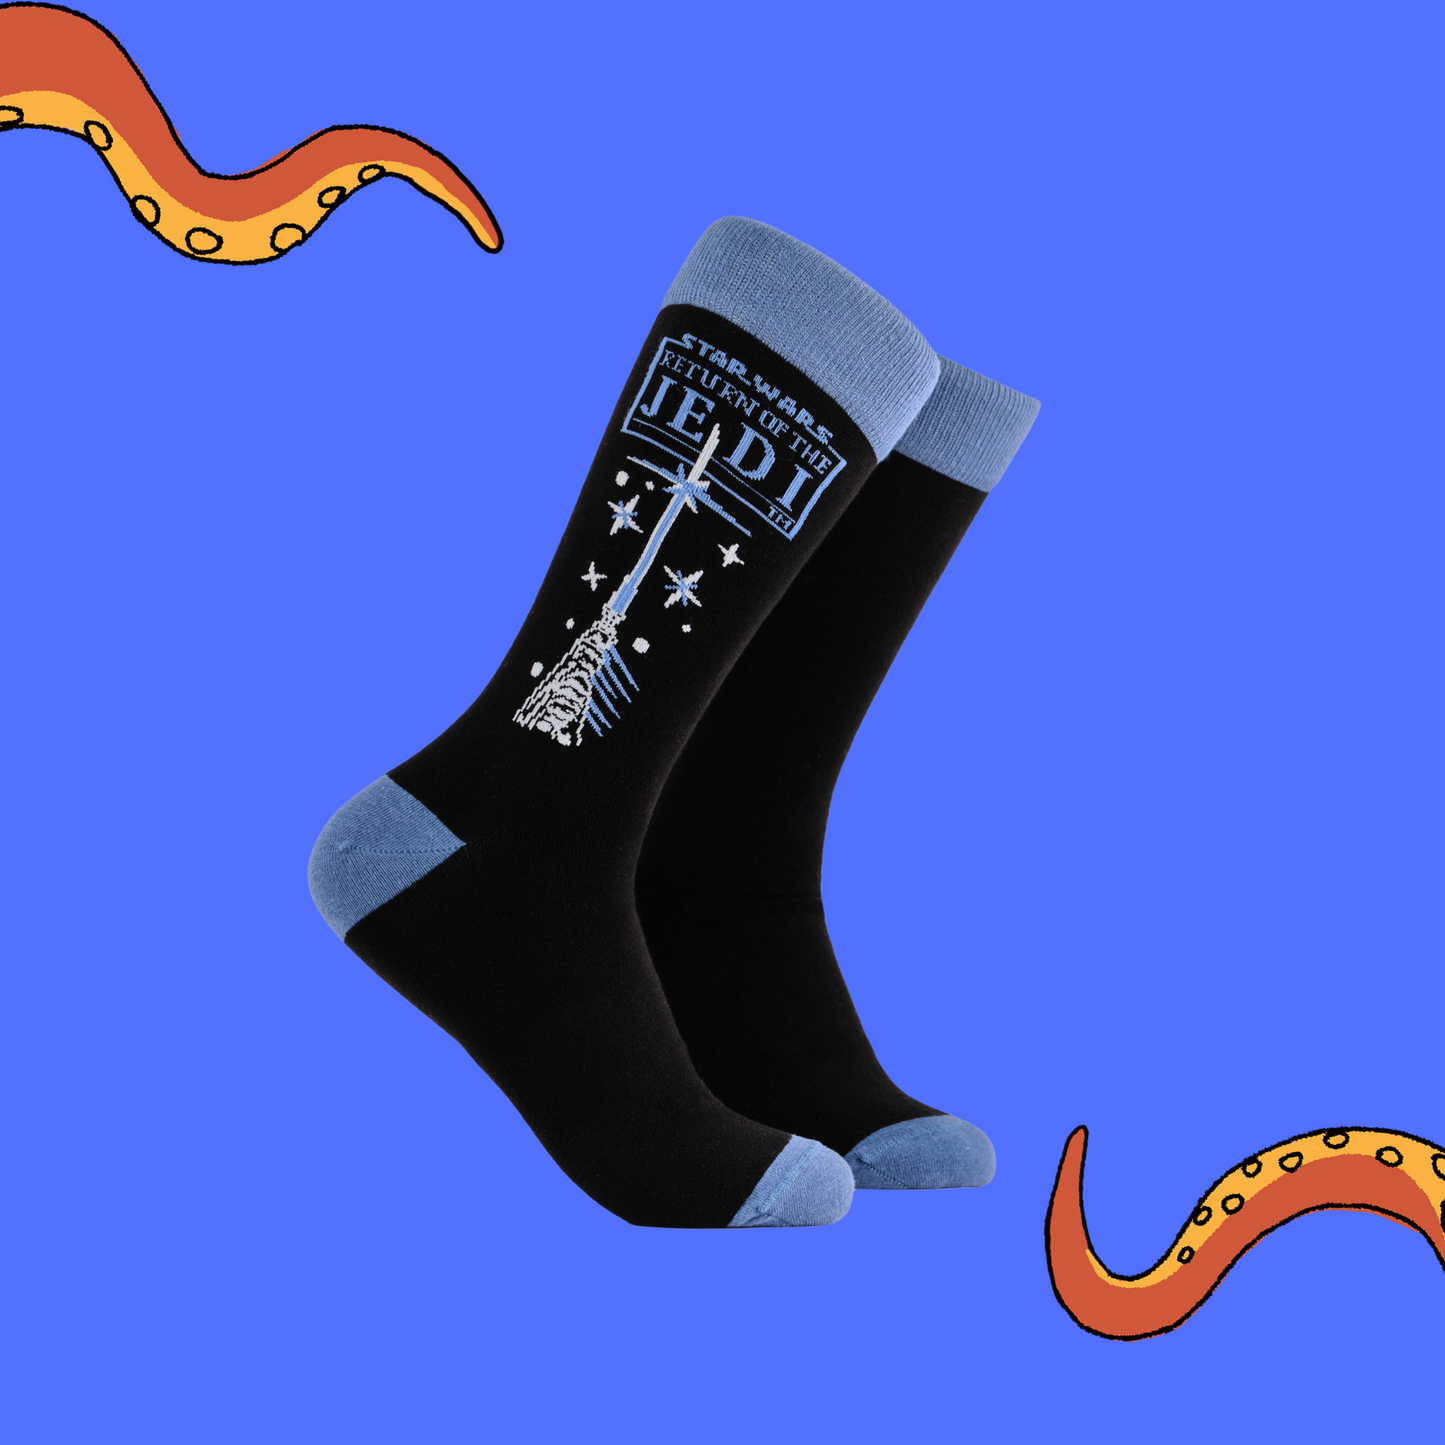 A pair of socks depicting hands holding a lightsaber. Black legs, blue cuff, heel and toe.